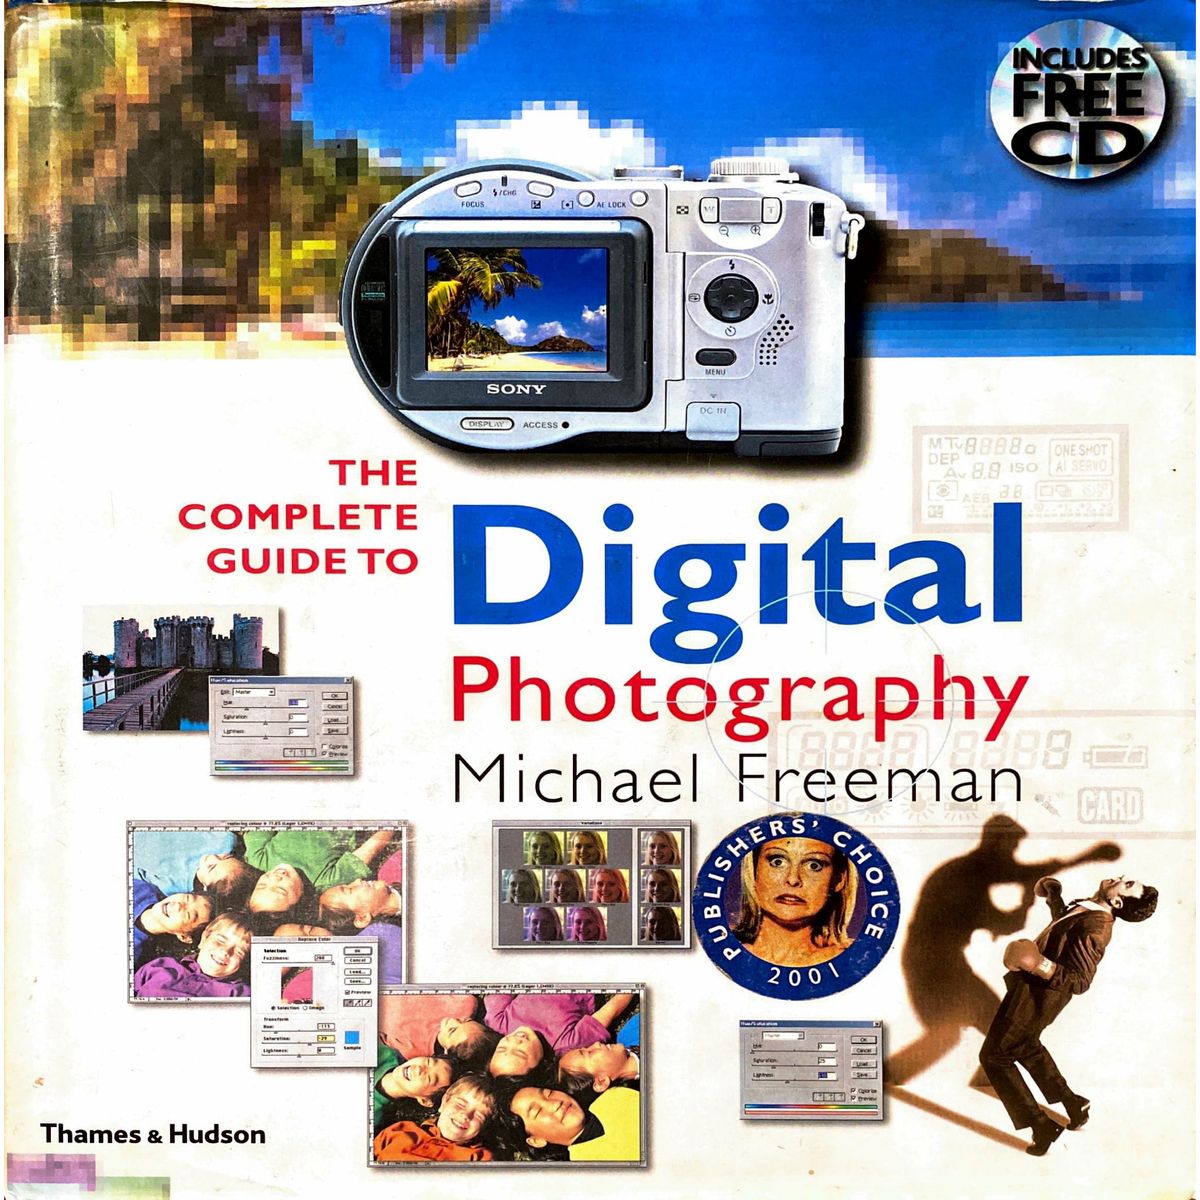 ISBN: 9780500542460 / 0500542465 - The Complete Guide to Digital Photography by Michael Freeman [2001]